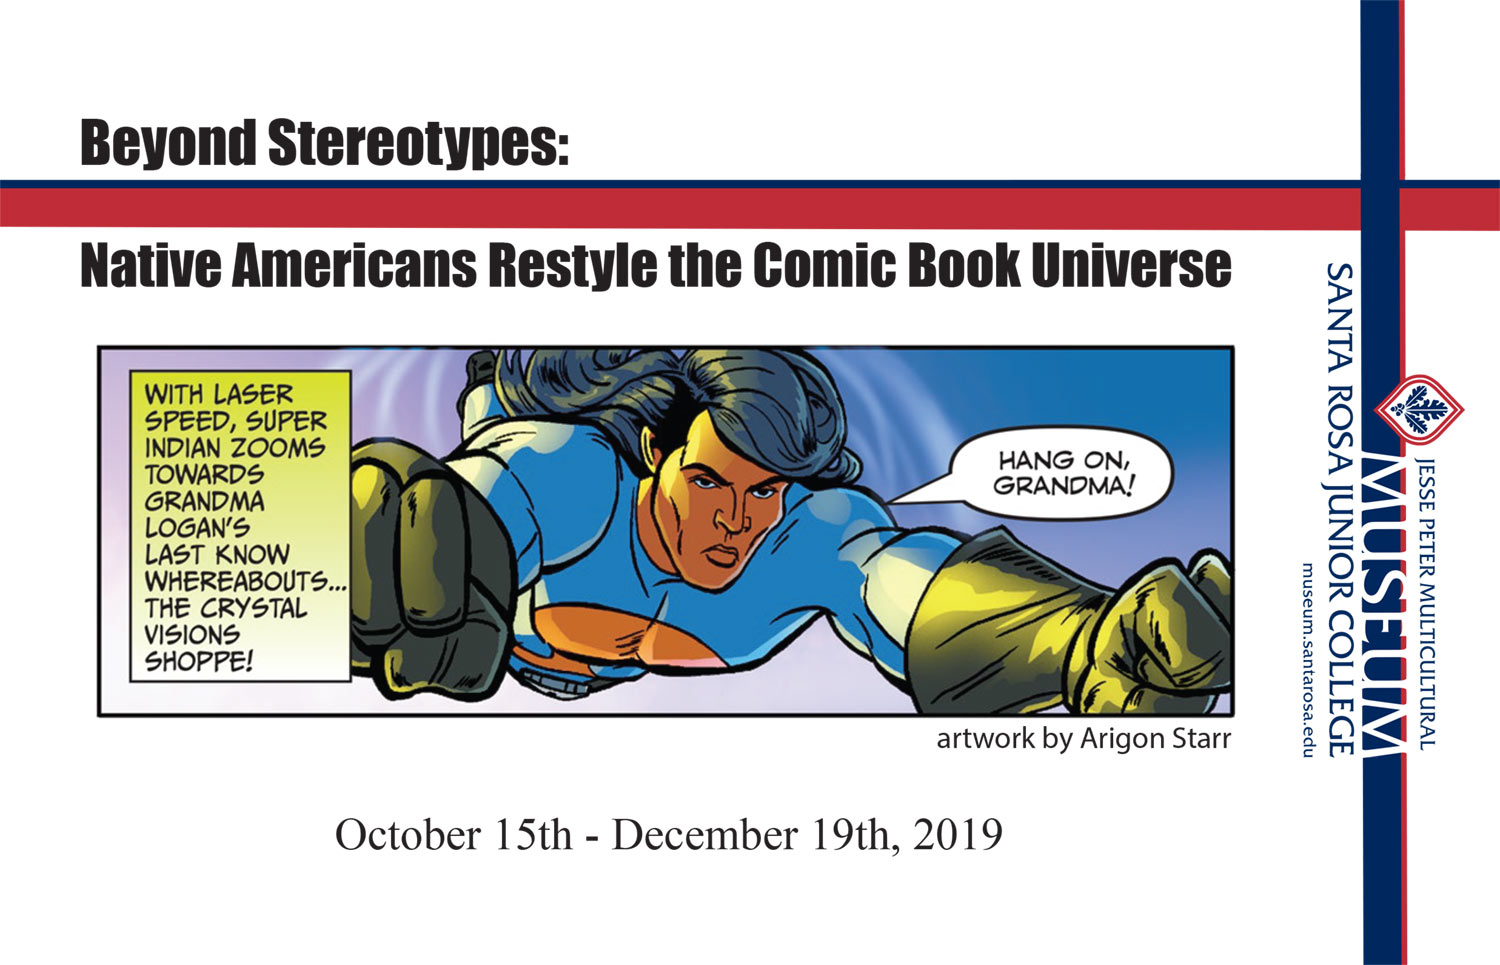 Beyond Stereotypes - Native Americans Restyle the Comic Book Universe